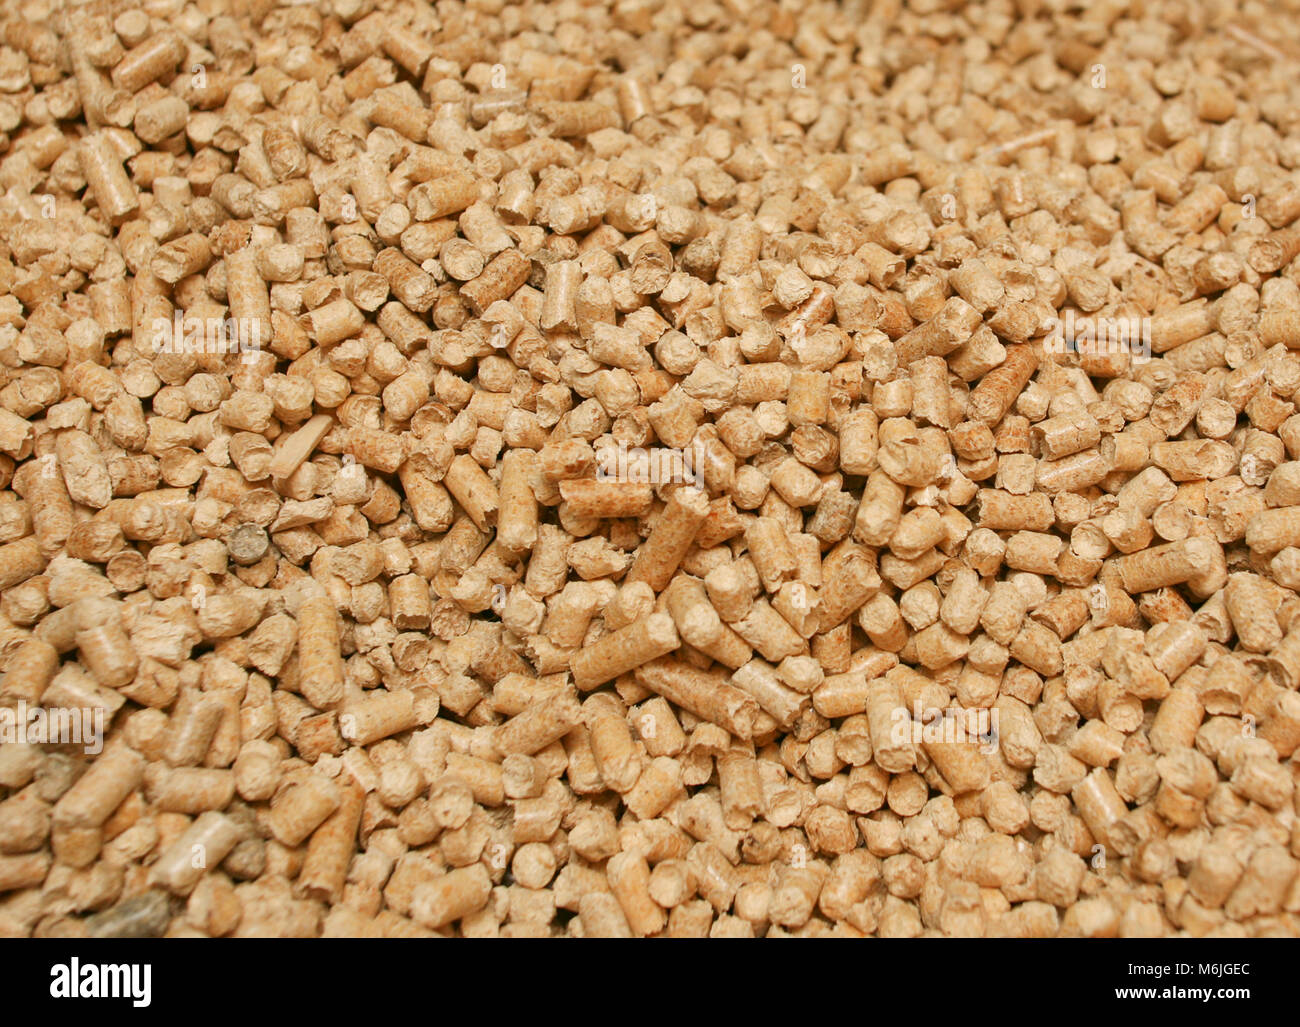 BIOMASS ENERGY Briquettes are use in a family house for heating 2007 Stock Photo